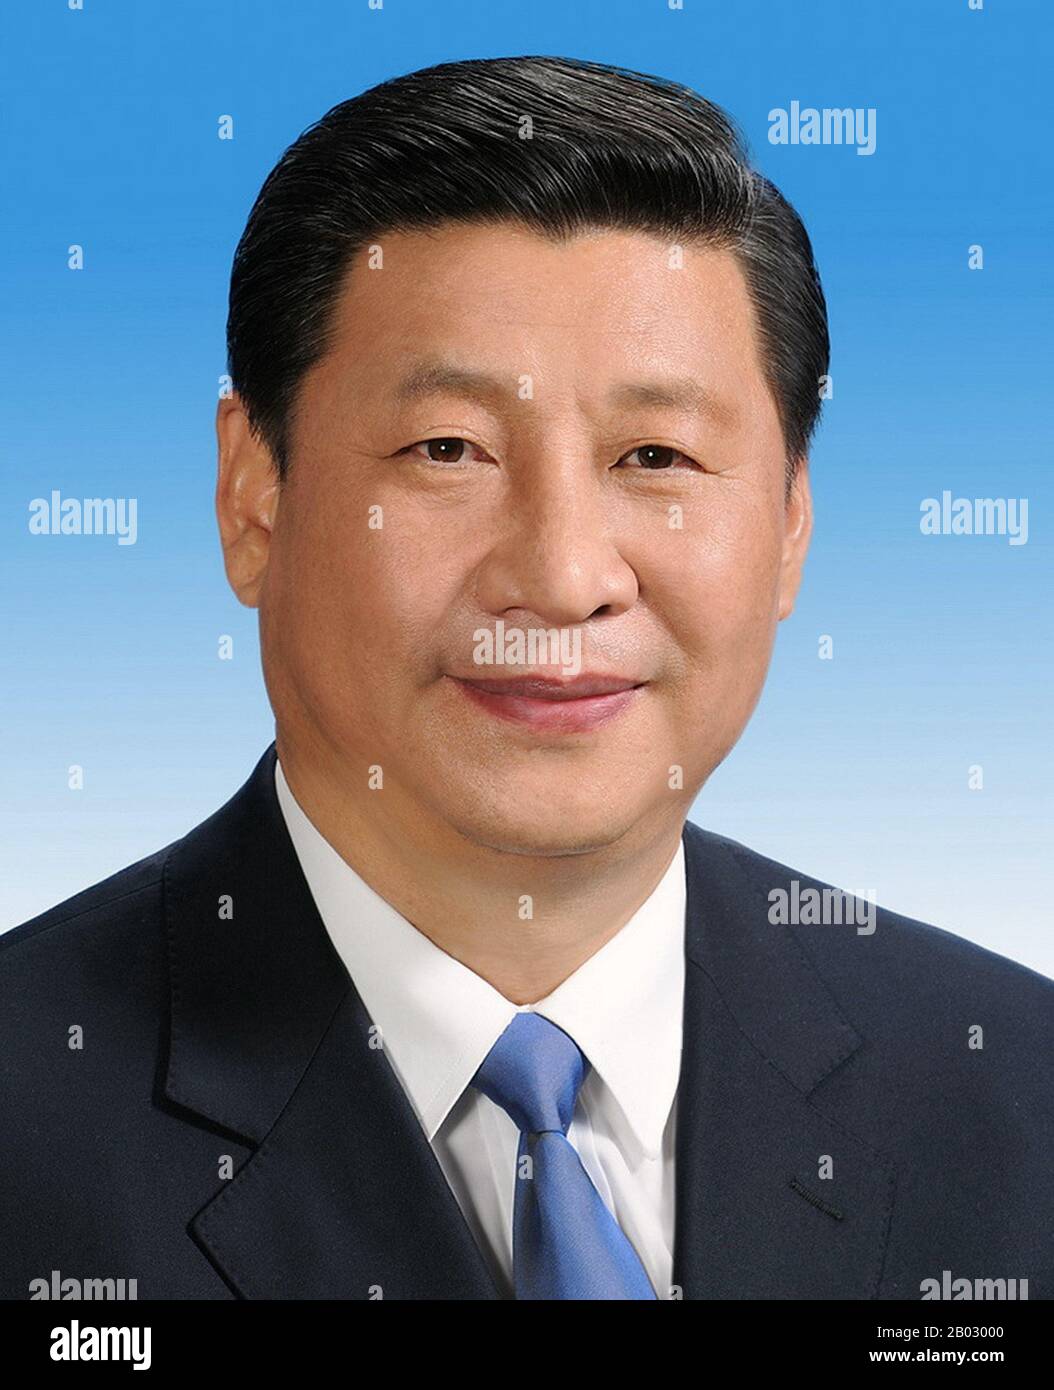 Xi Jinping (born 15 June 1953) is the General Secretary of the Communist Party of China, the President of the People's Republic of China, and the Chairman of the Central Military Commission. Stock Photo